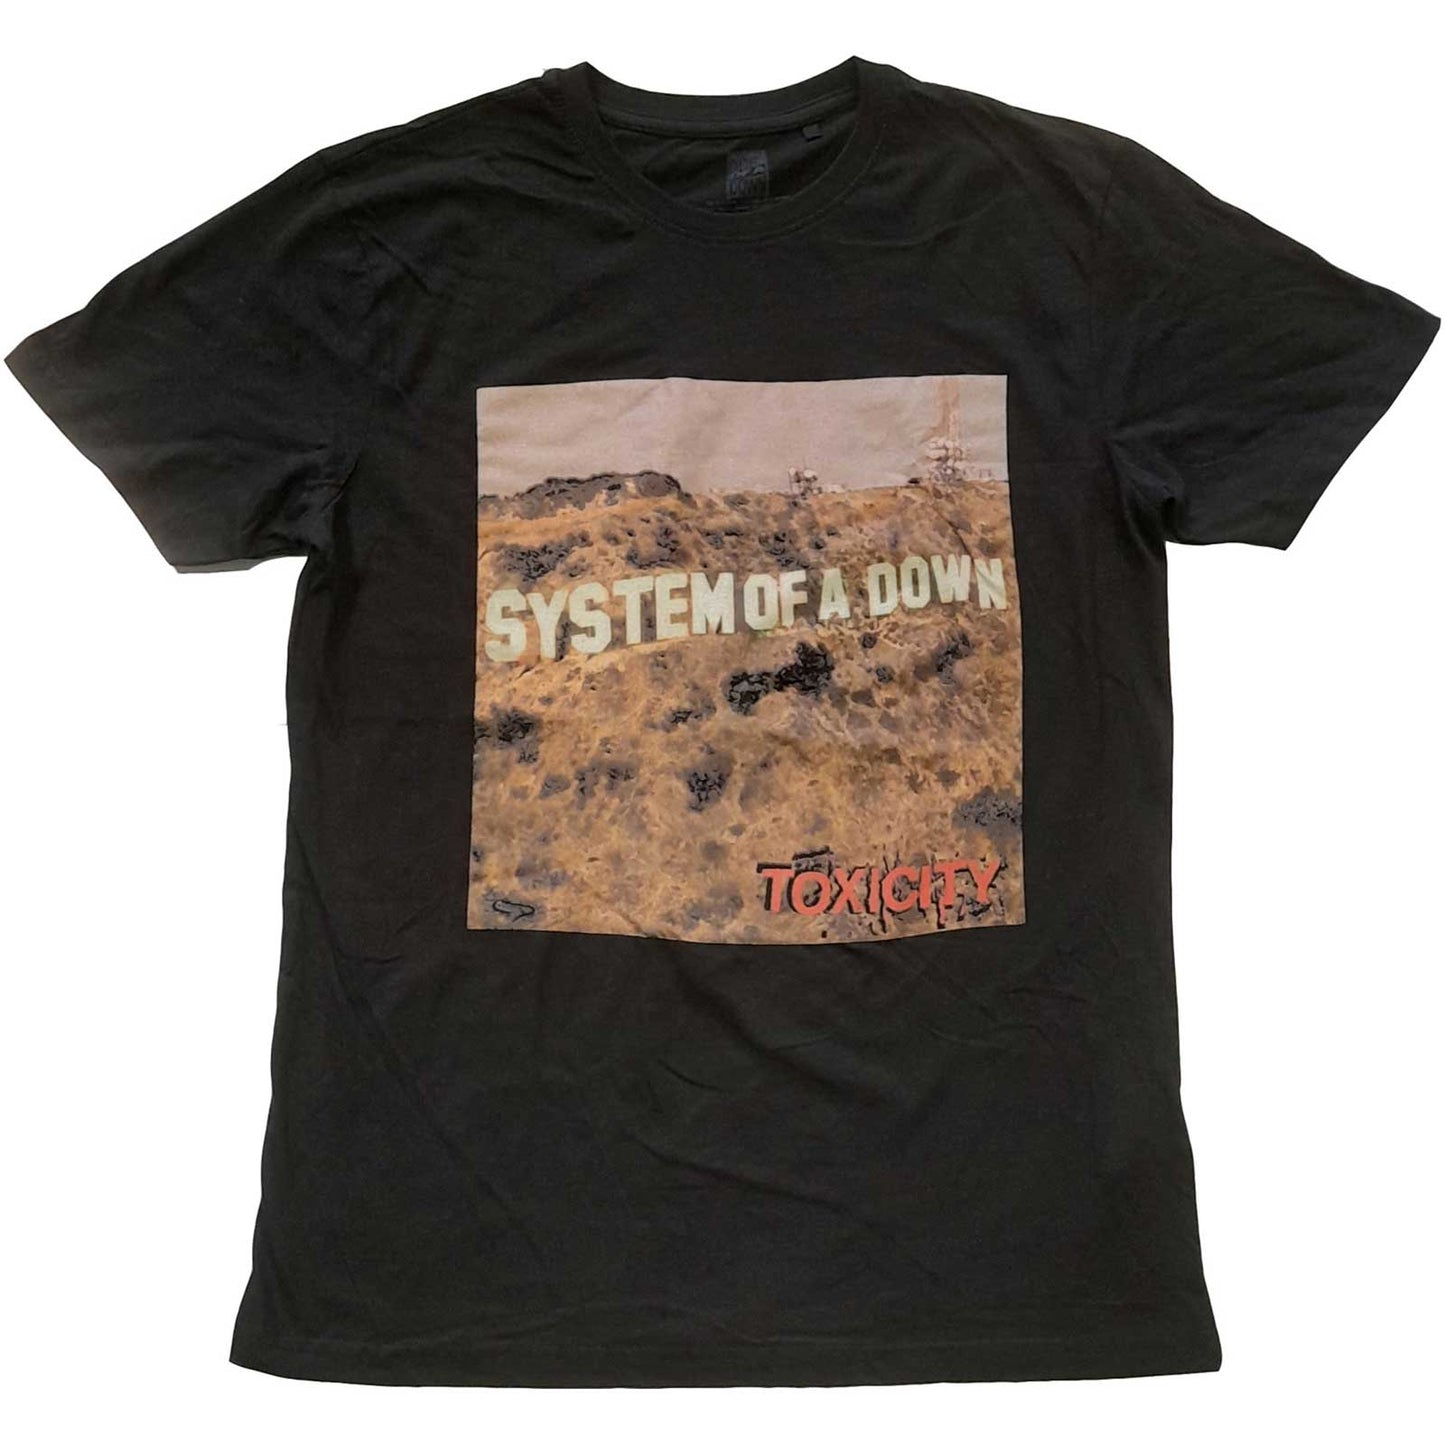 System of a Down T-Shirt - Toxicity Album Cover (Unisex)